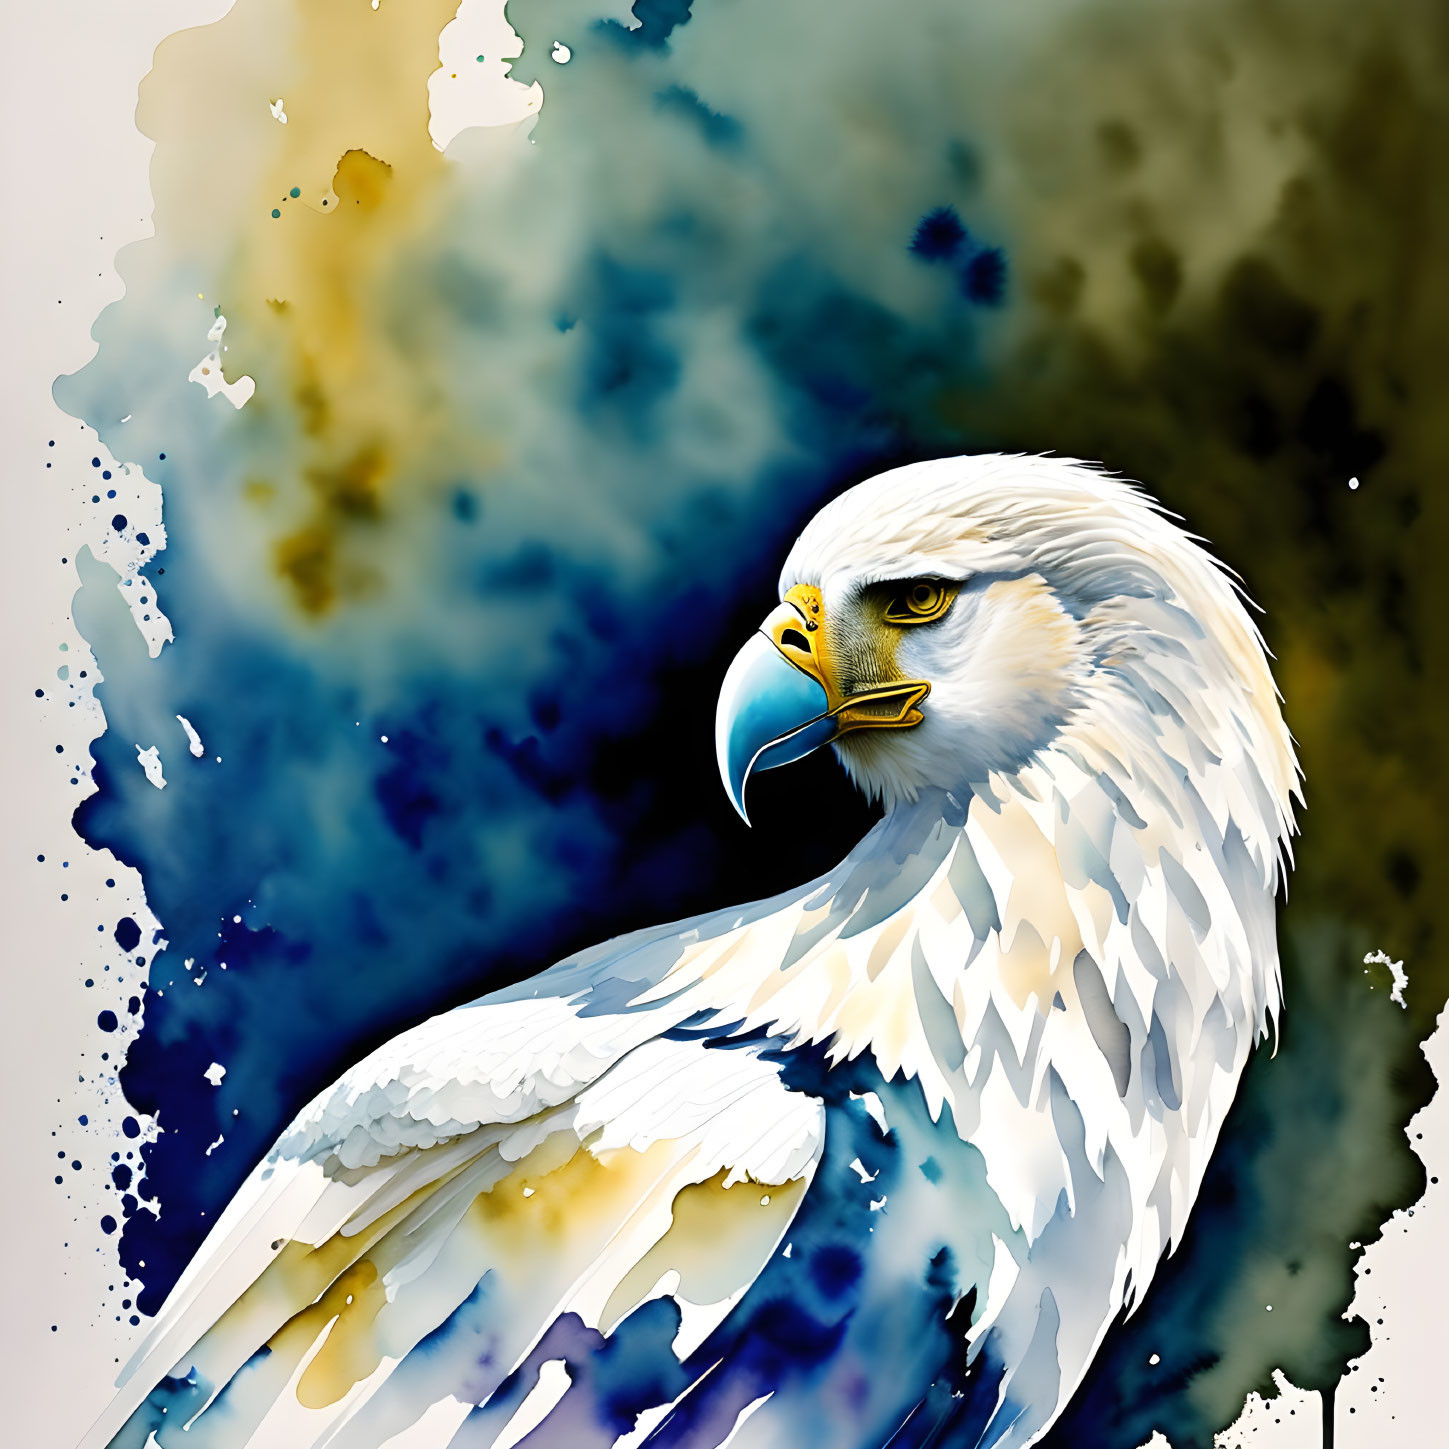 Detailed Bald Eagle Head Illustration on Watercolor Background